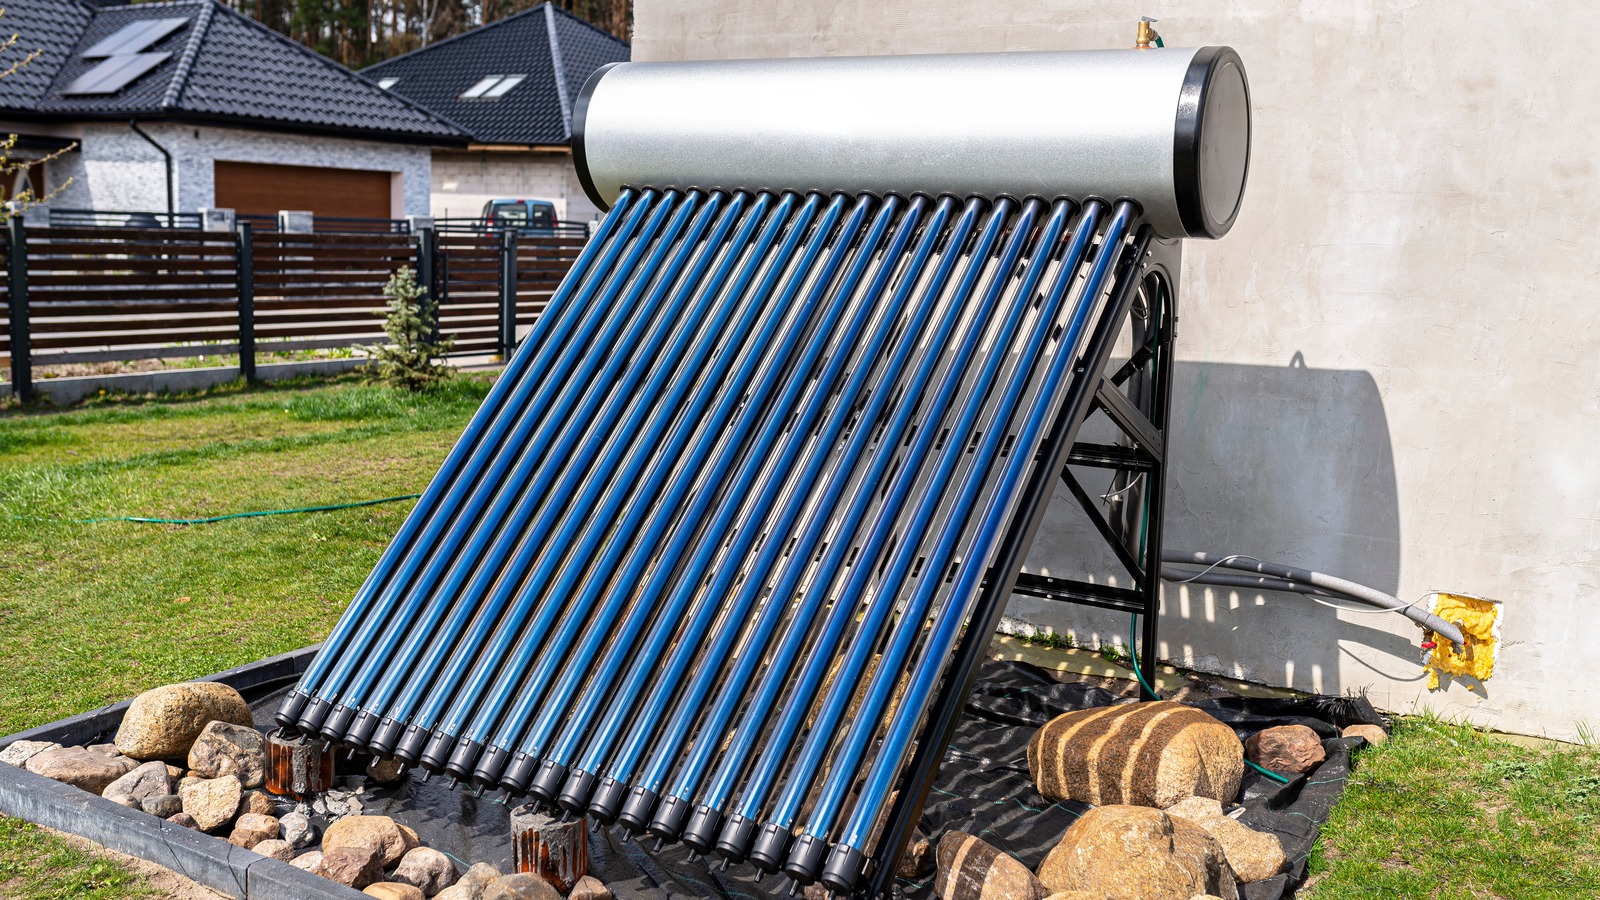 Solar Water Heaters: Are They Worth the Cost?